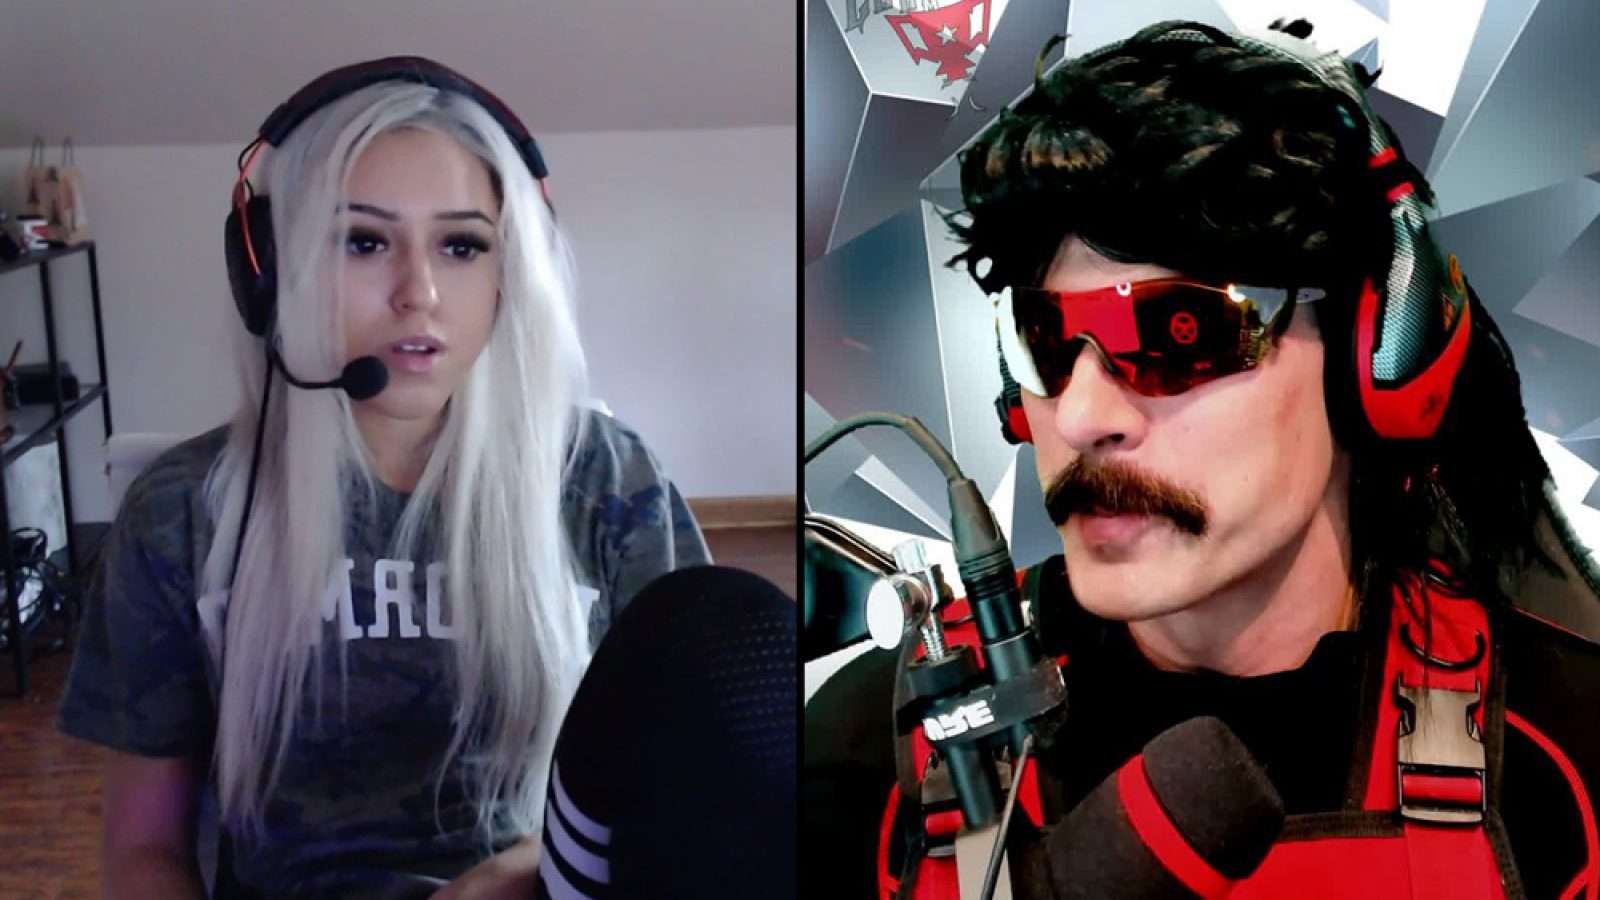 caitlyn davenport add photo who did drdisrespect cheat with